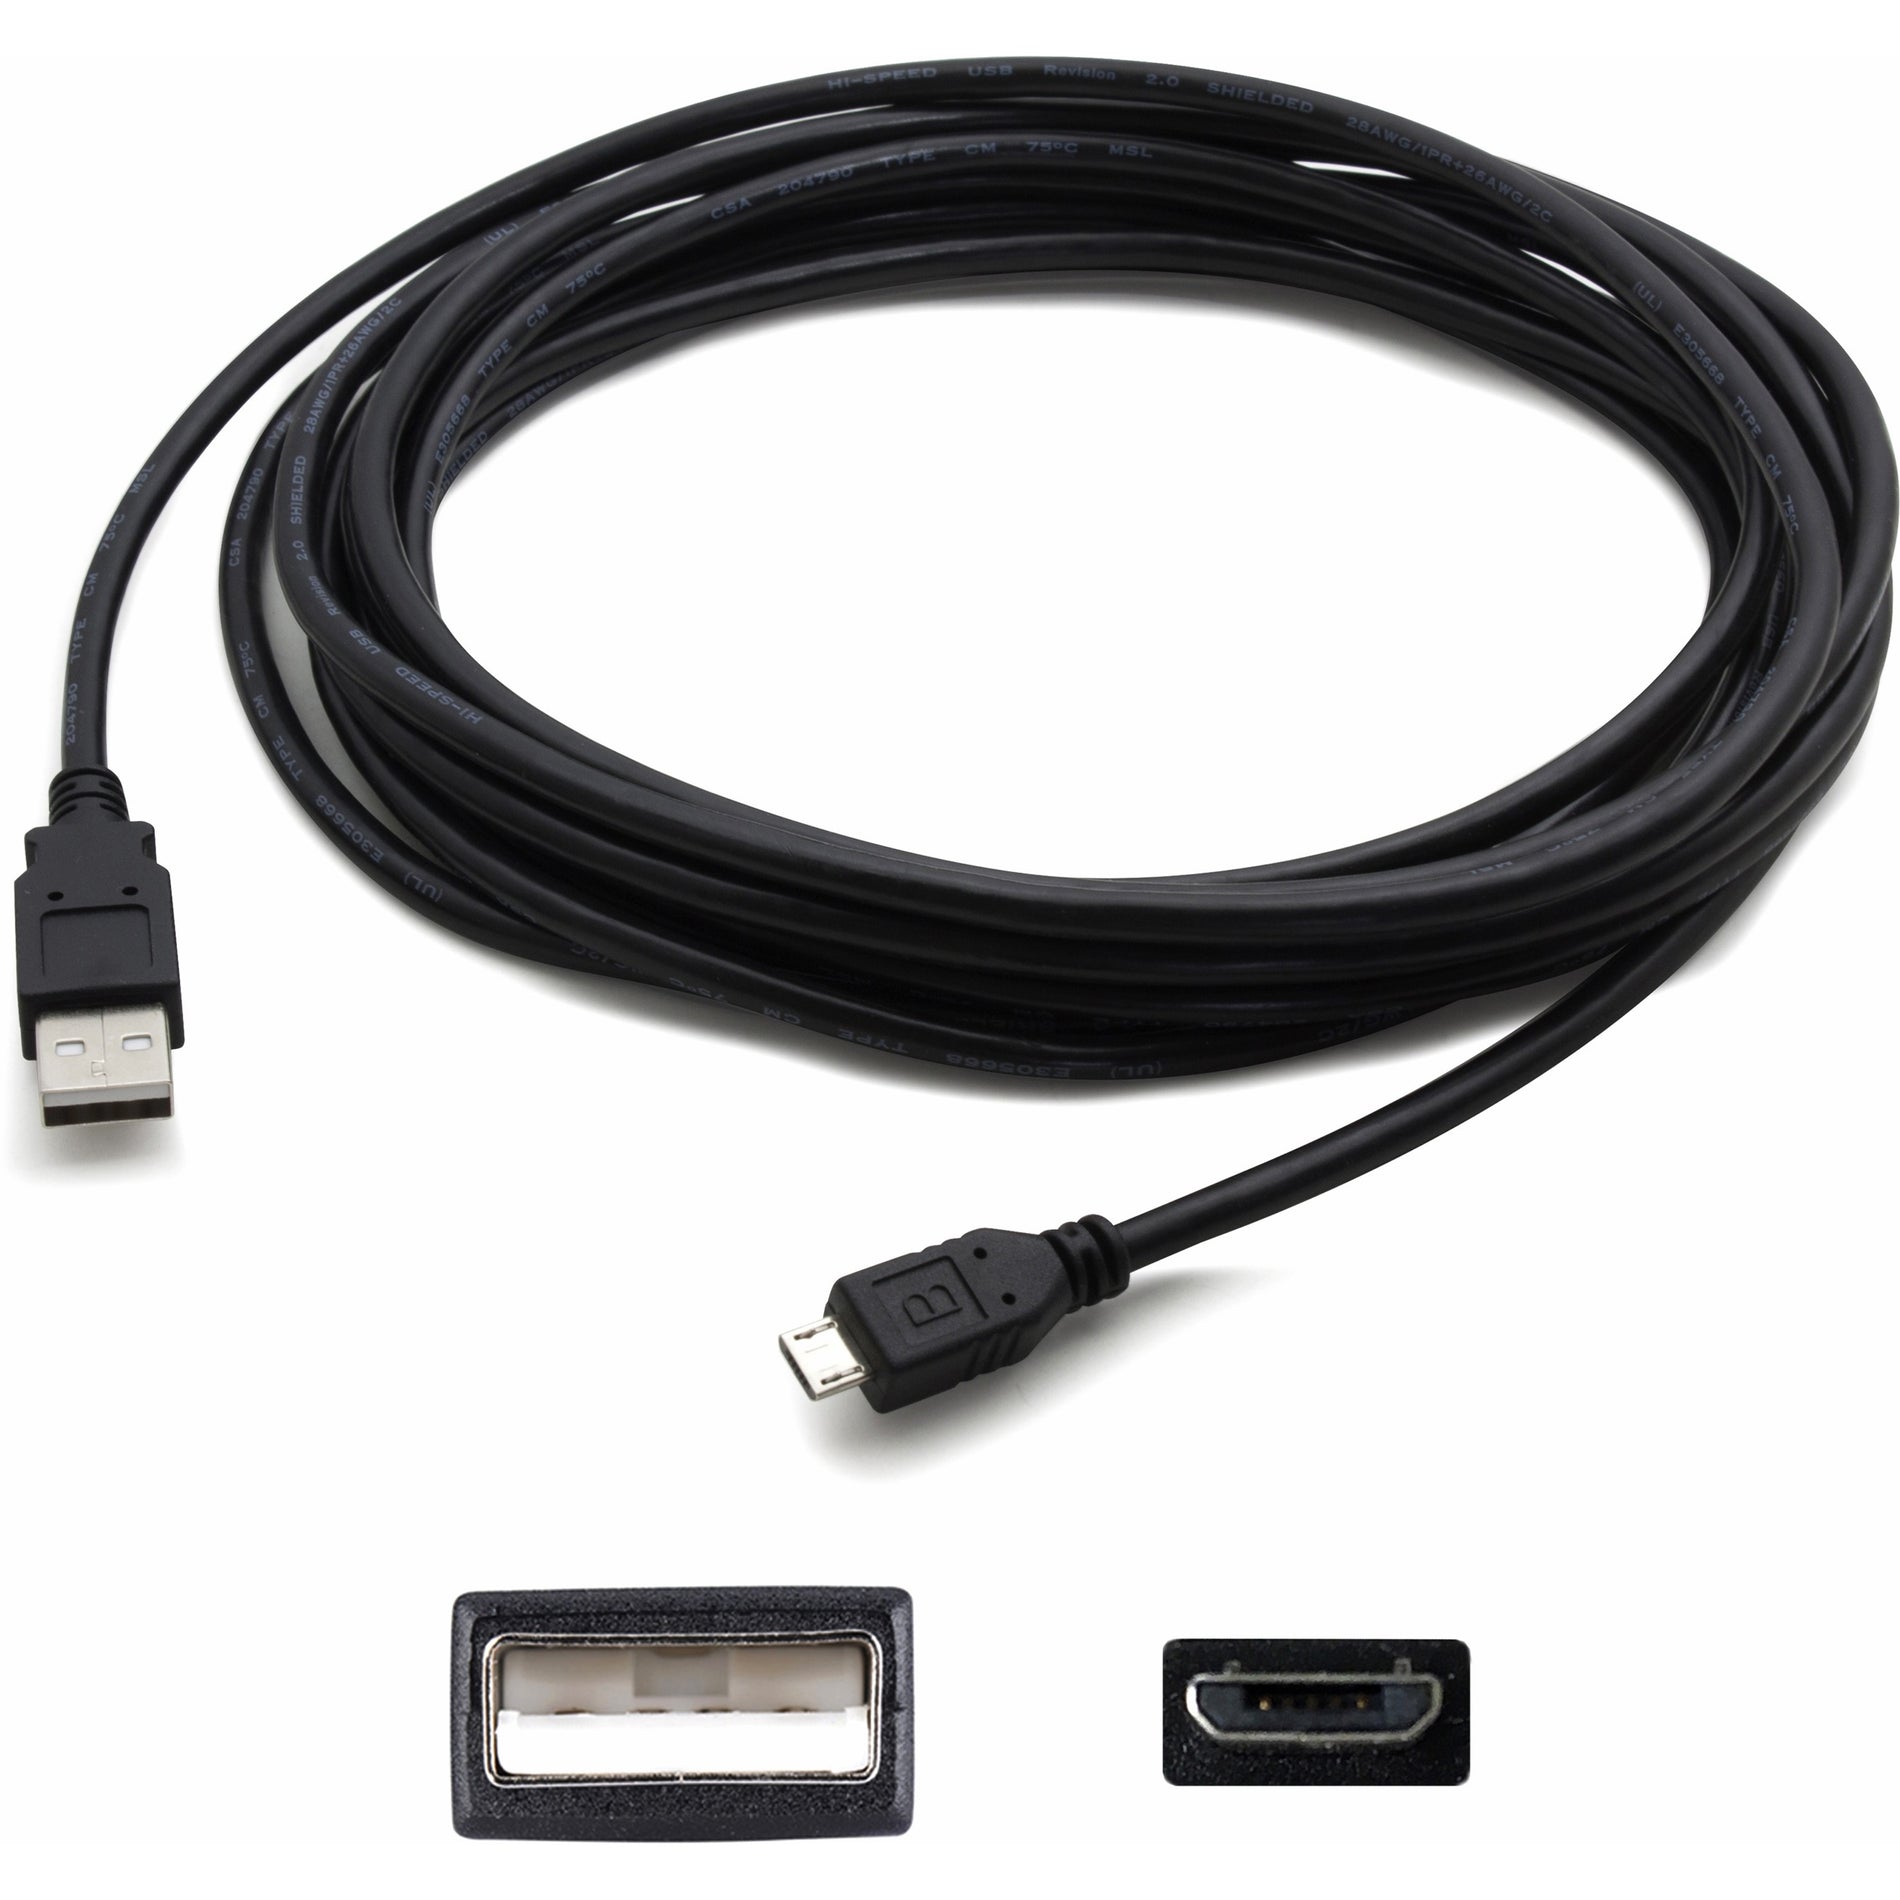 AddOn USB2MICROUSB15 15ft USB 2.0 (A) Male to Micro-USB 2.0 (B) Female Black Cable, 3 Year Warranty